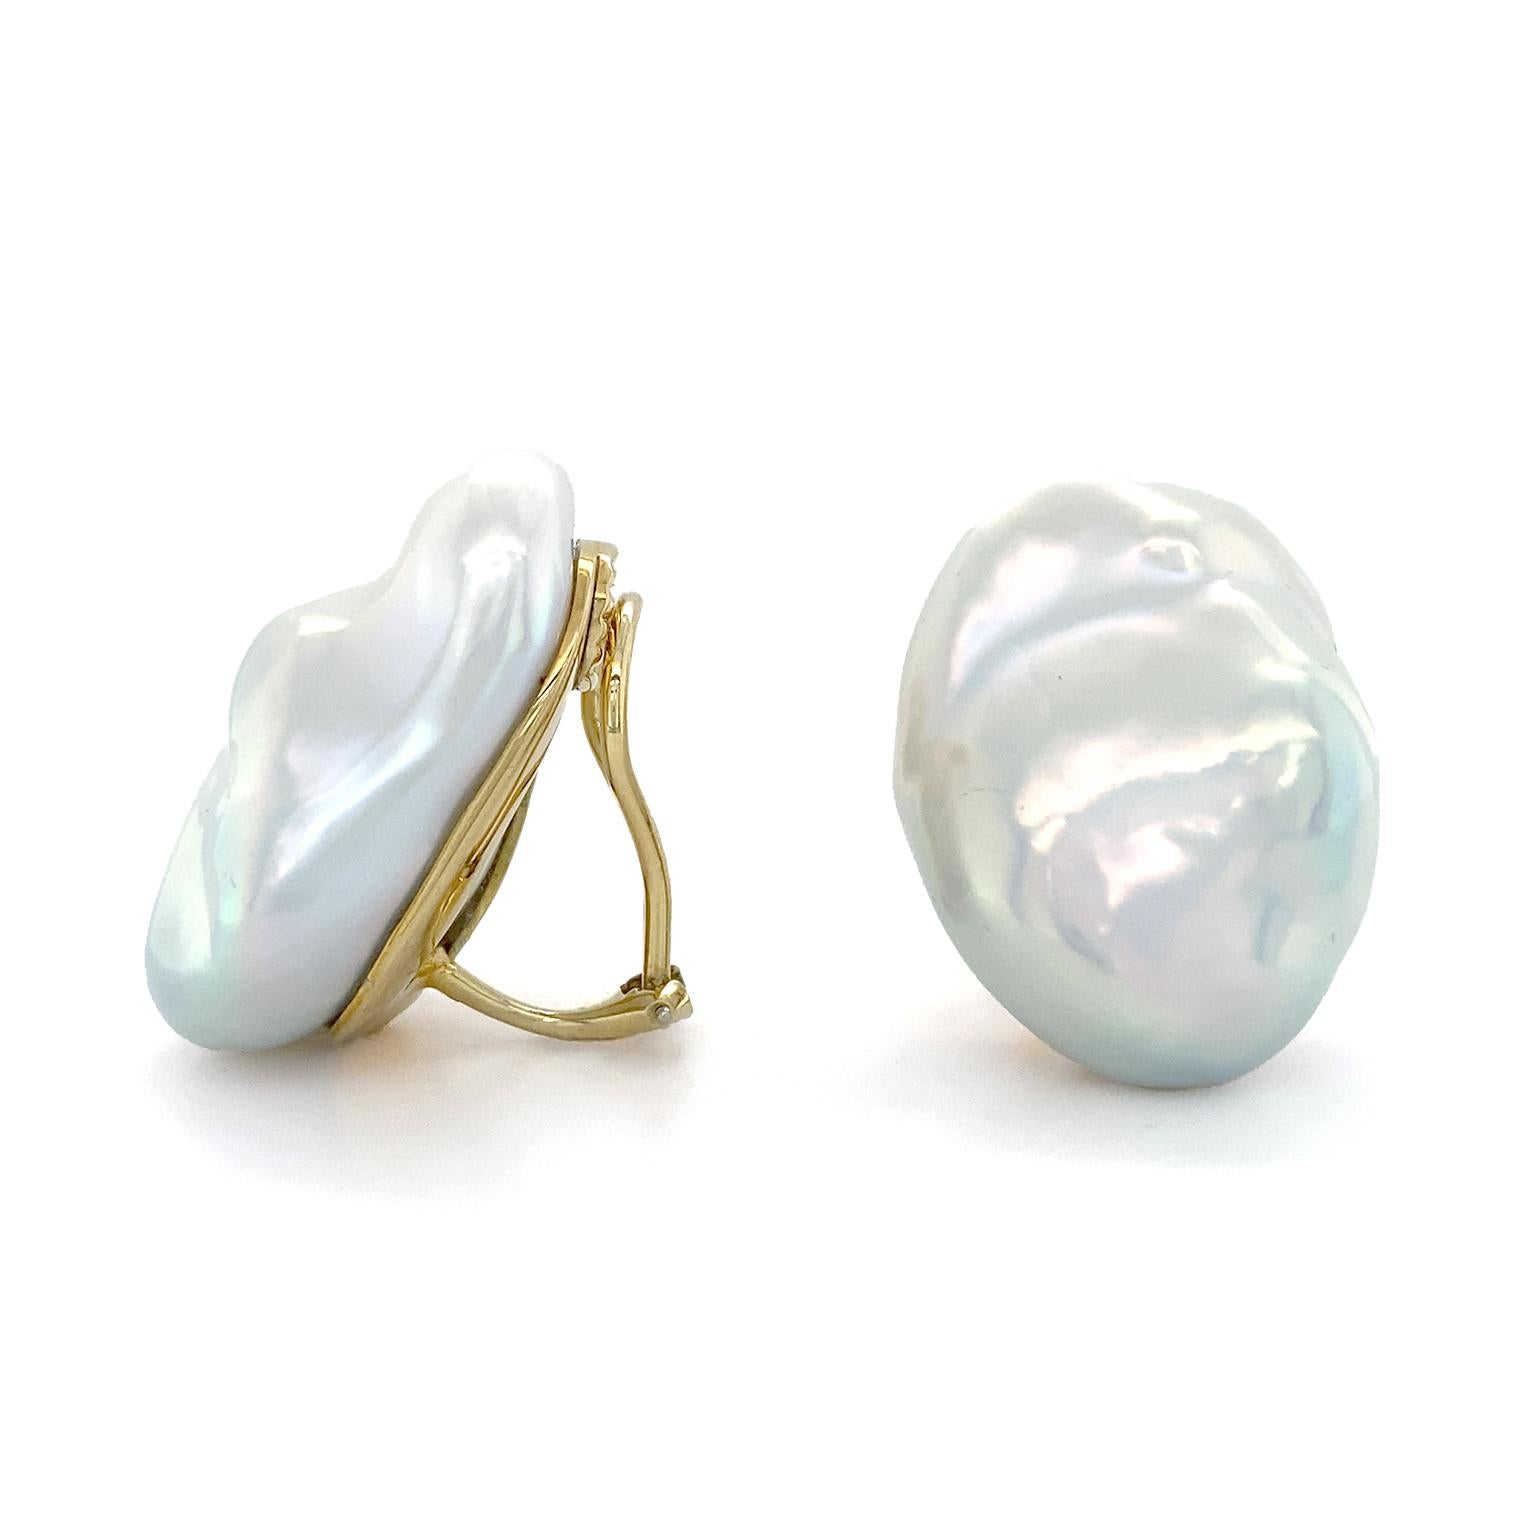 Iridescence make these baroque pearl earrings stand out. The freshwater pearls have many layers of hue. Over the bodycolor are sheens of blue, green, gold and more. Baroque’s irregular surfaces allow for varying color concentrations. The backs of